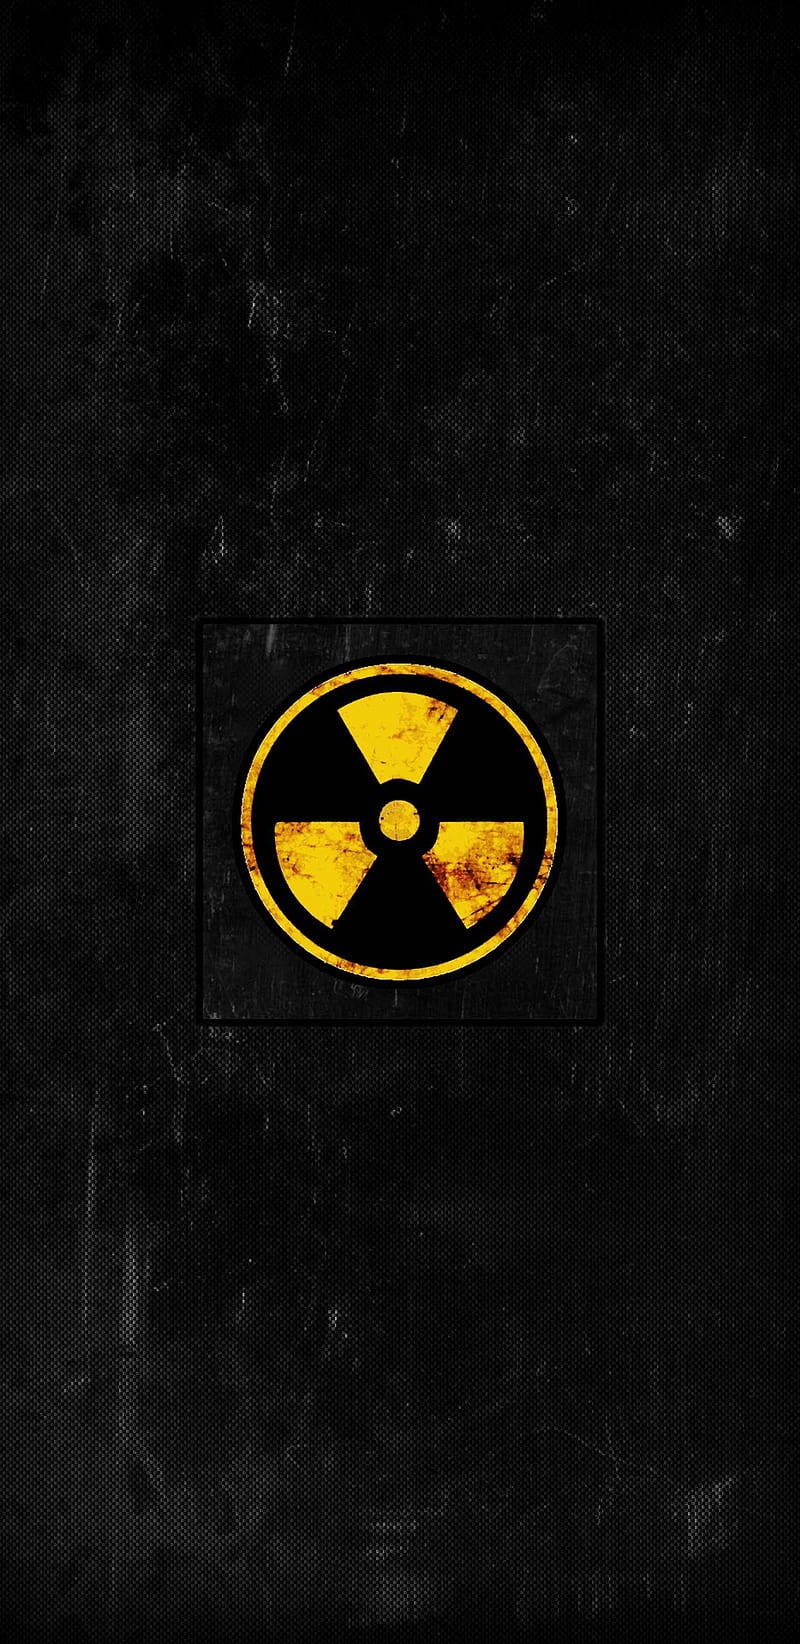 Nuclear Photos Download The BEST Free Nuclear Stock Photos  HD Images